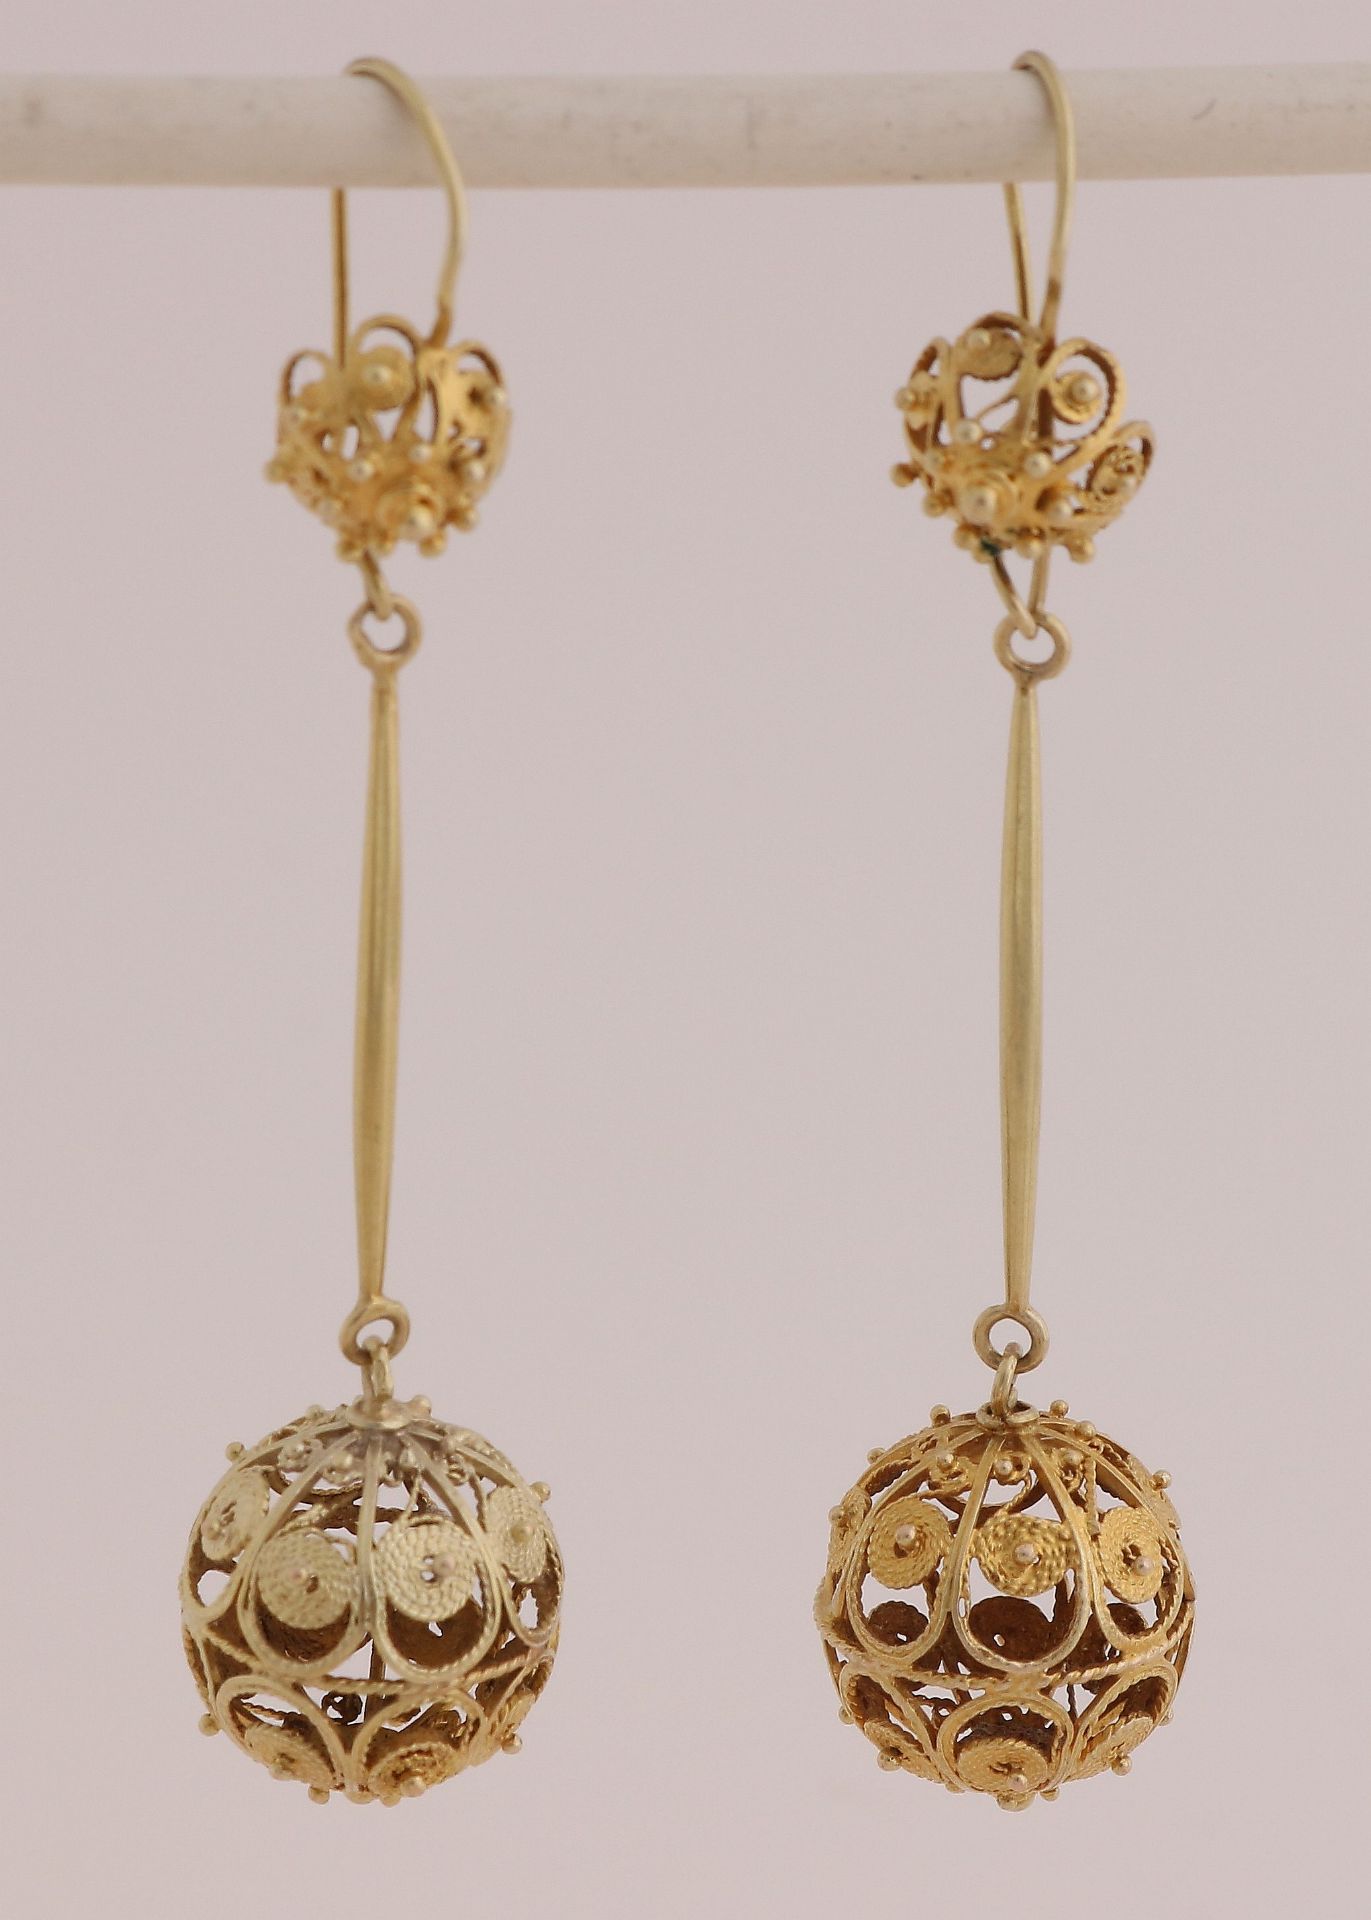 Gold earrings with filigree balls